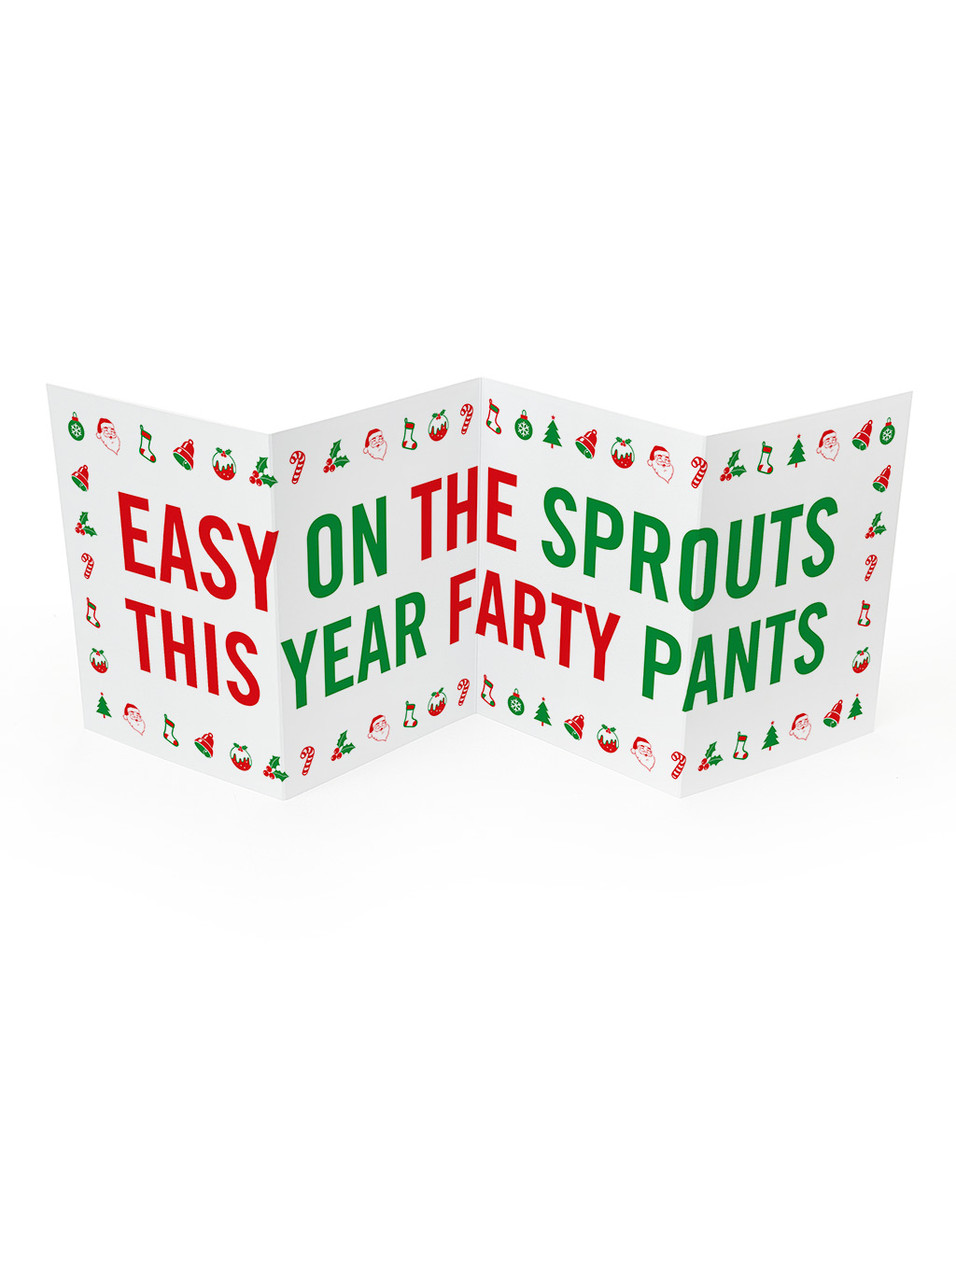 Easy on the Sprouts this year Farty Pants - Concertina Christmas